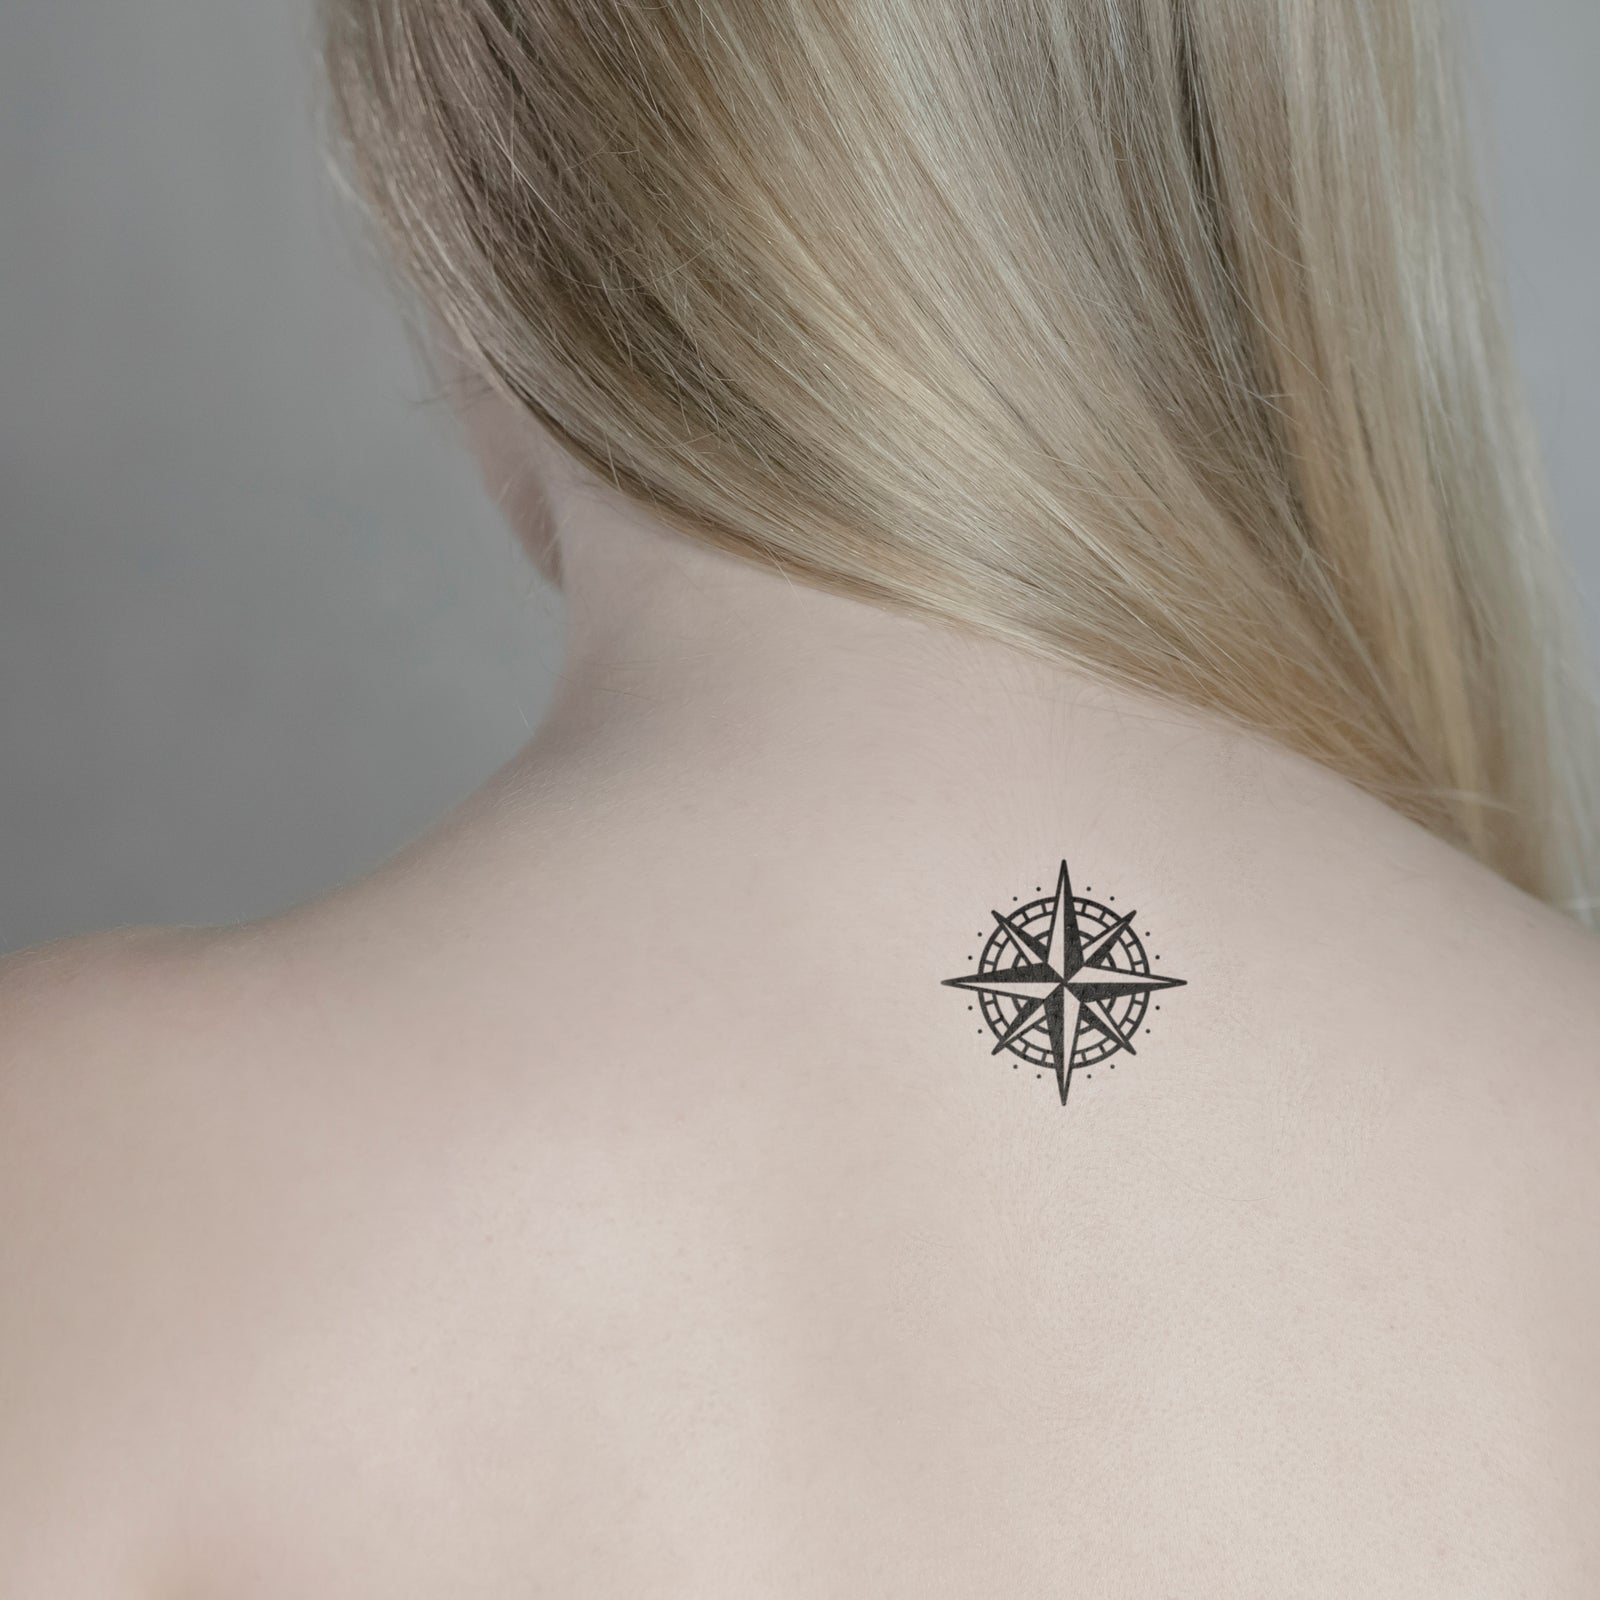 Buy Compass Tattoo Design Online In India - Etsy India